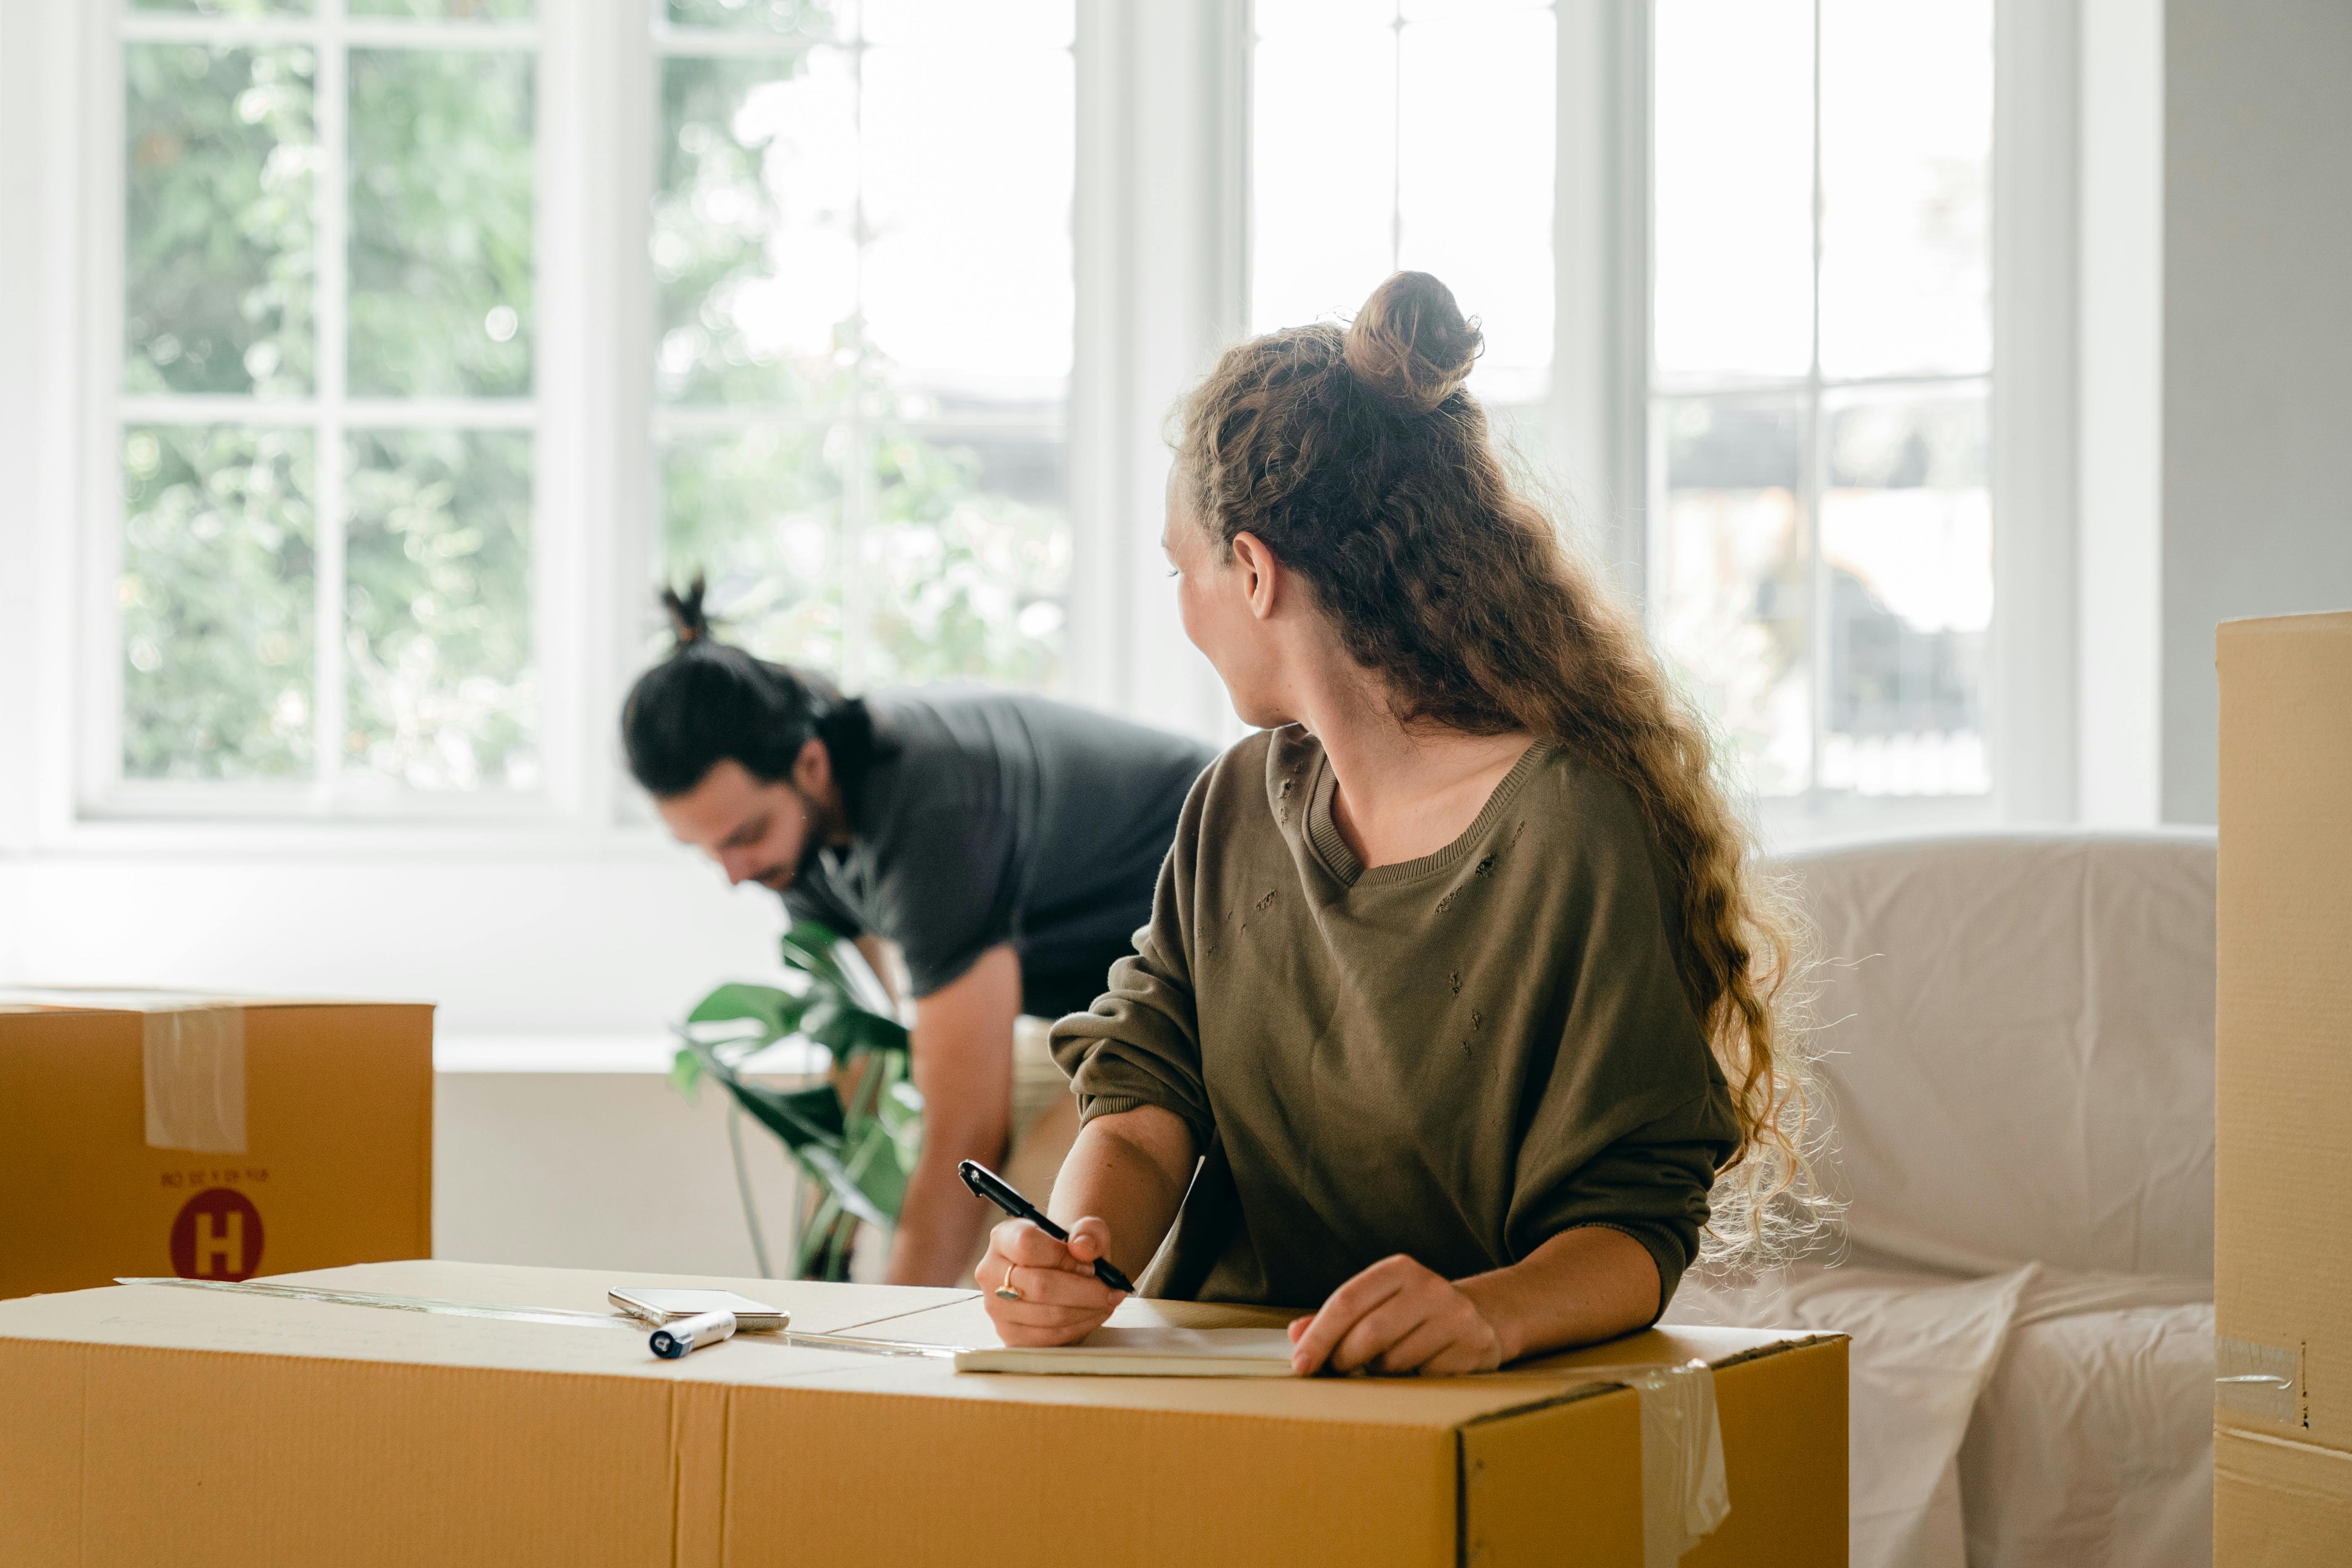 Couple moving houses | Source: Pexels